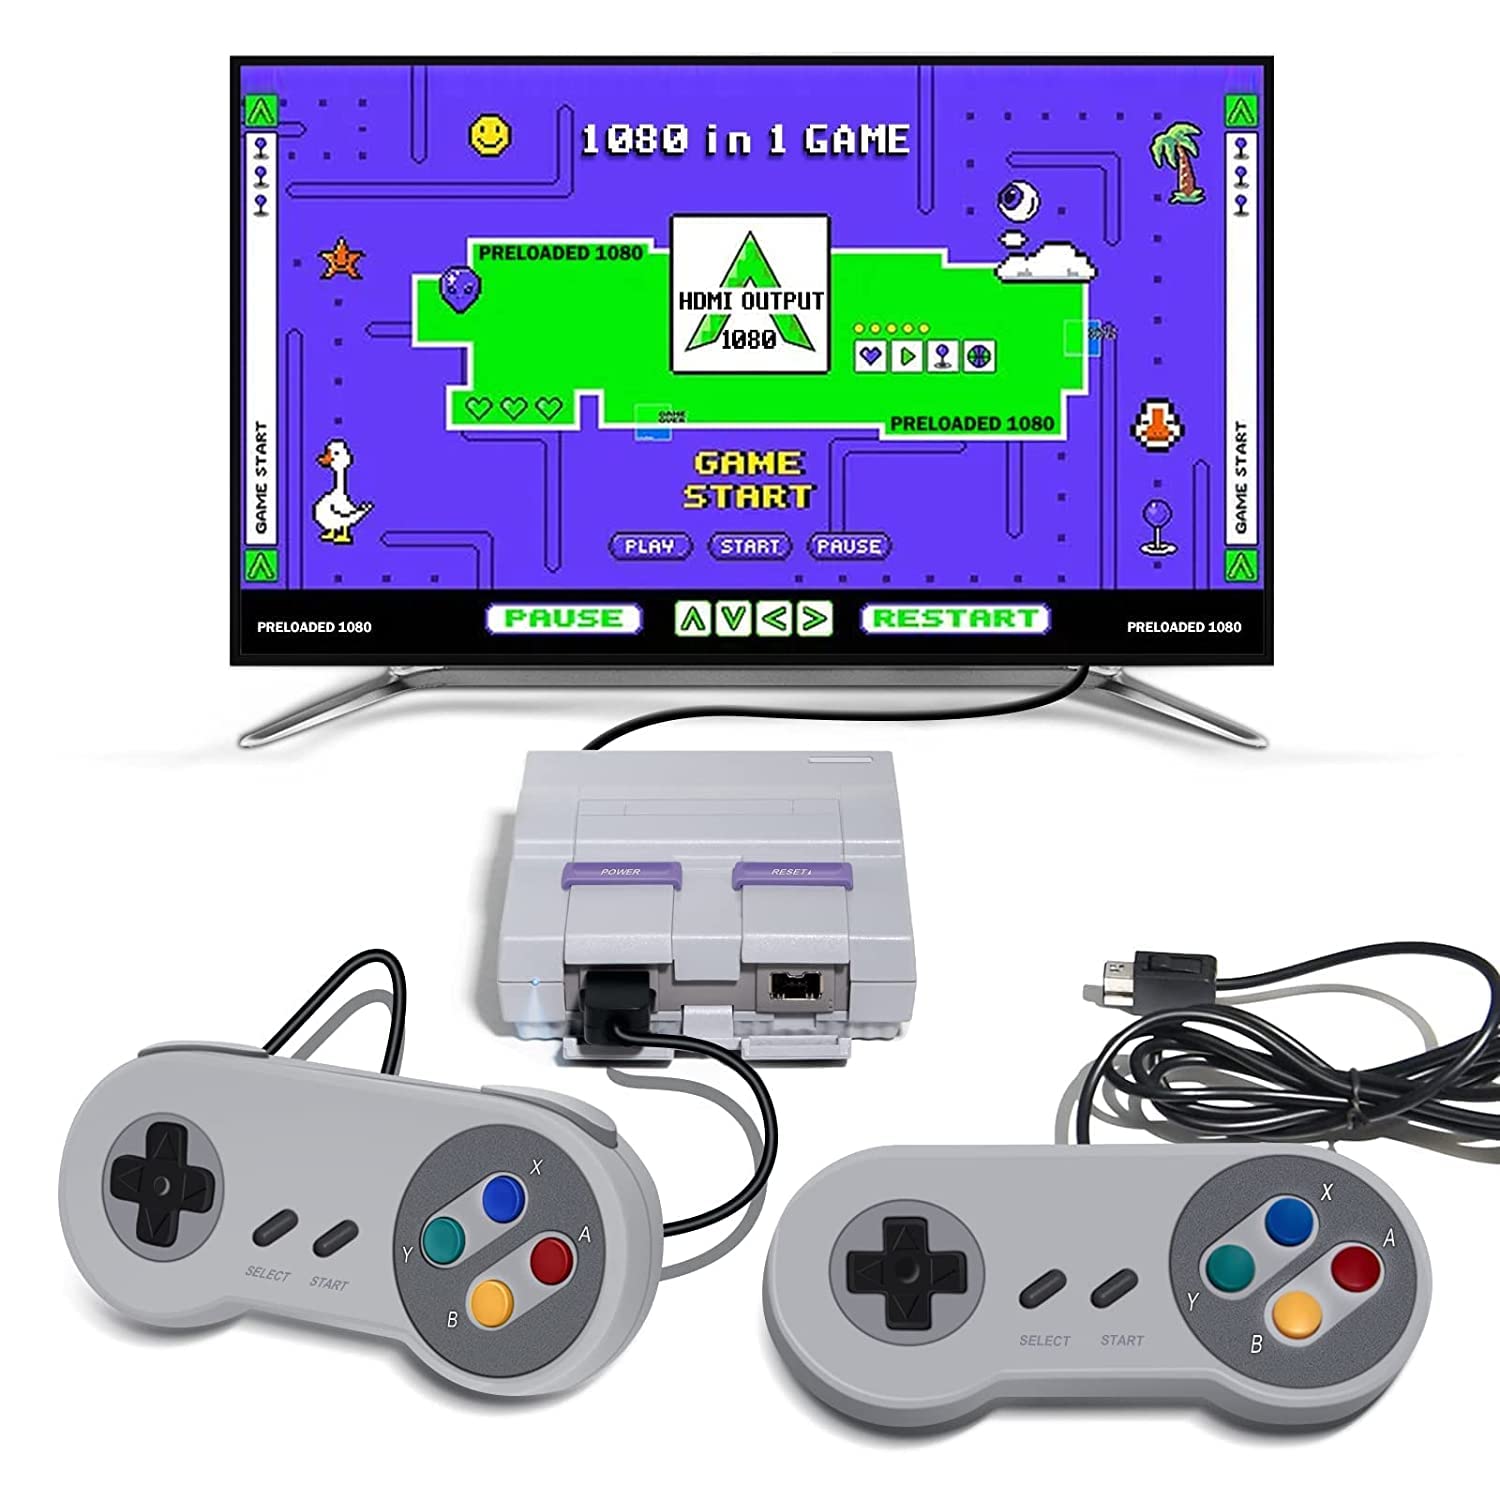 Duduuka Retro Game Console – Classic Mini Retro Game System Built-in 1080 Games and 2 Controllers, 8-Bit Video Game System with Old-School Gaming for Adults and Kids, Support TF Card Plug and Play